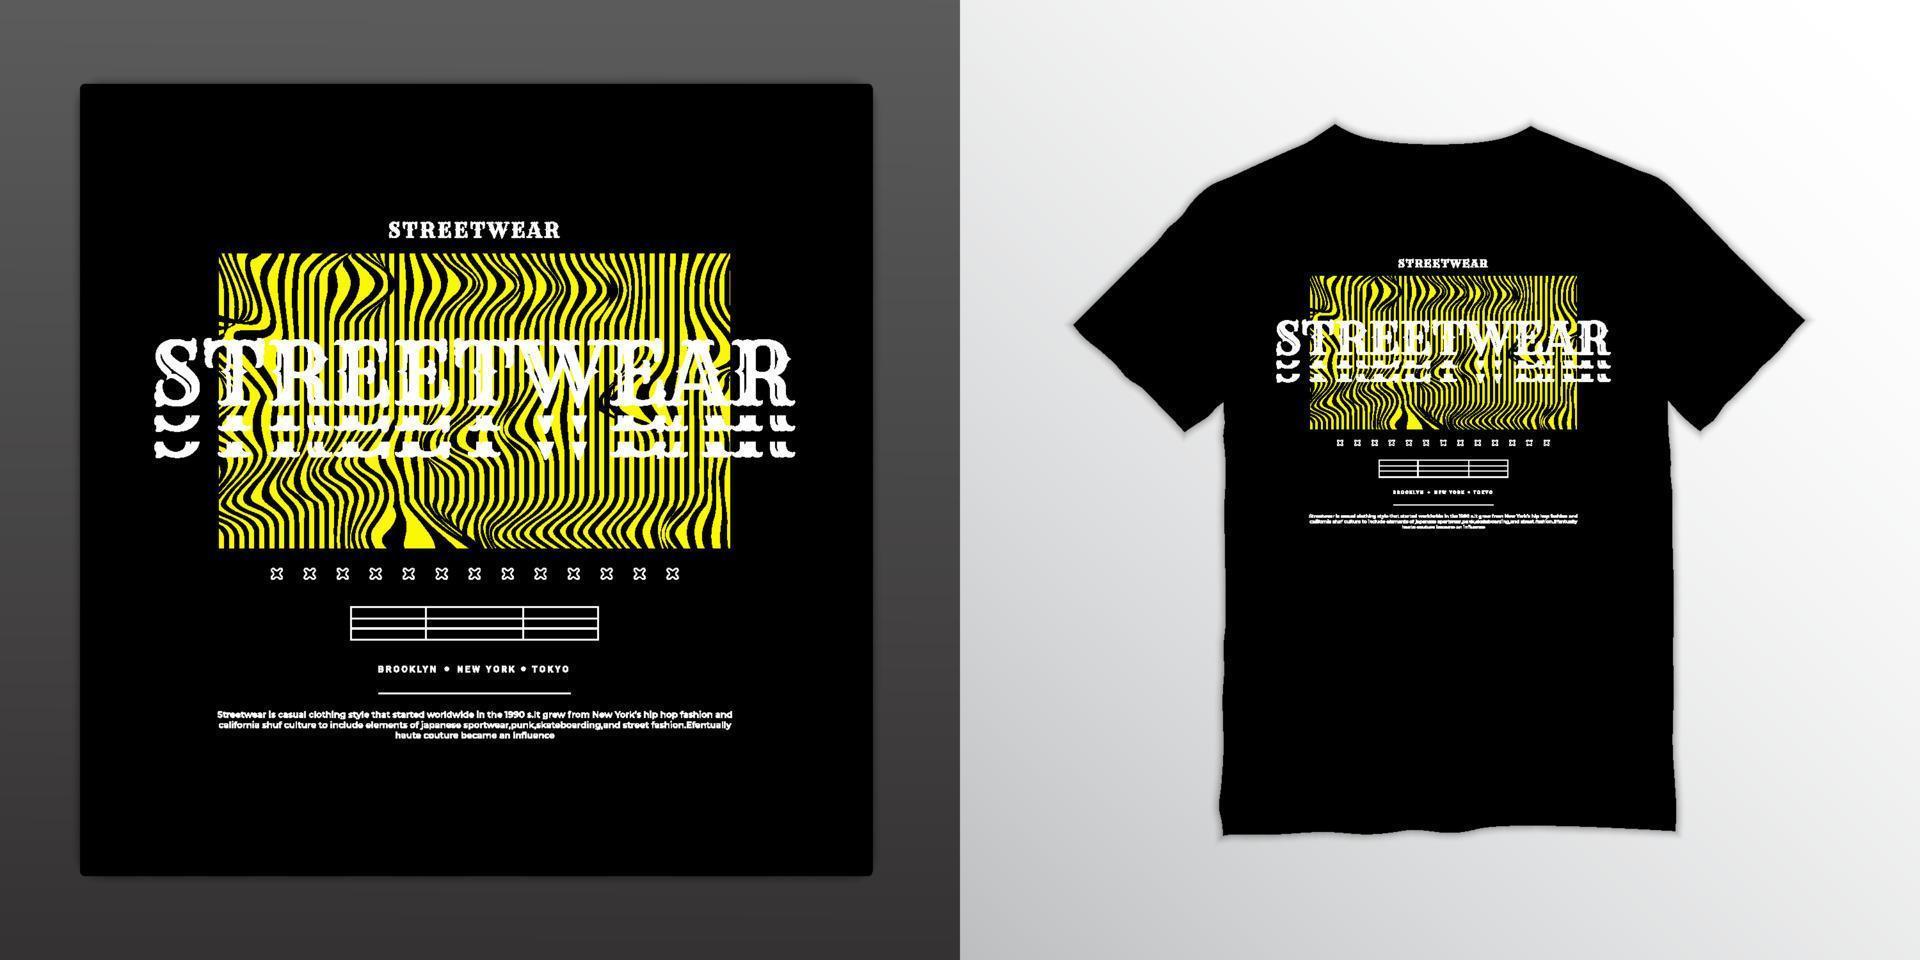 Streetwear t-shirt design, suitable for screen printing, jackets and ...